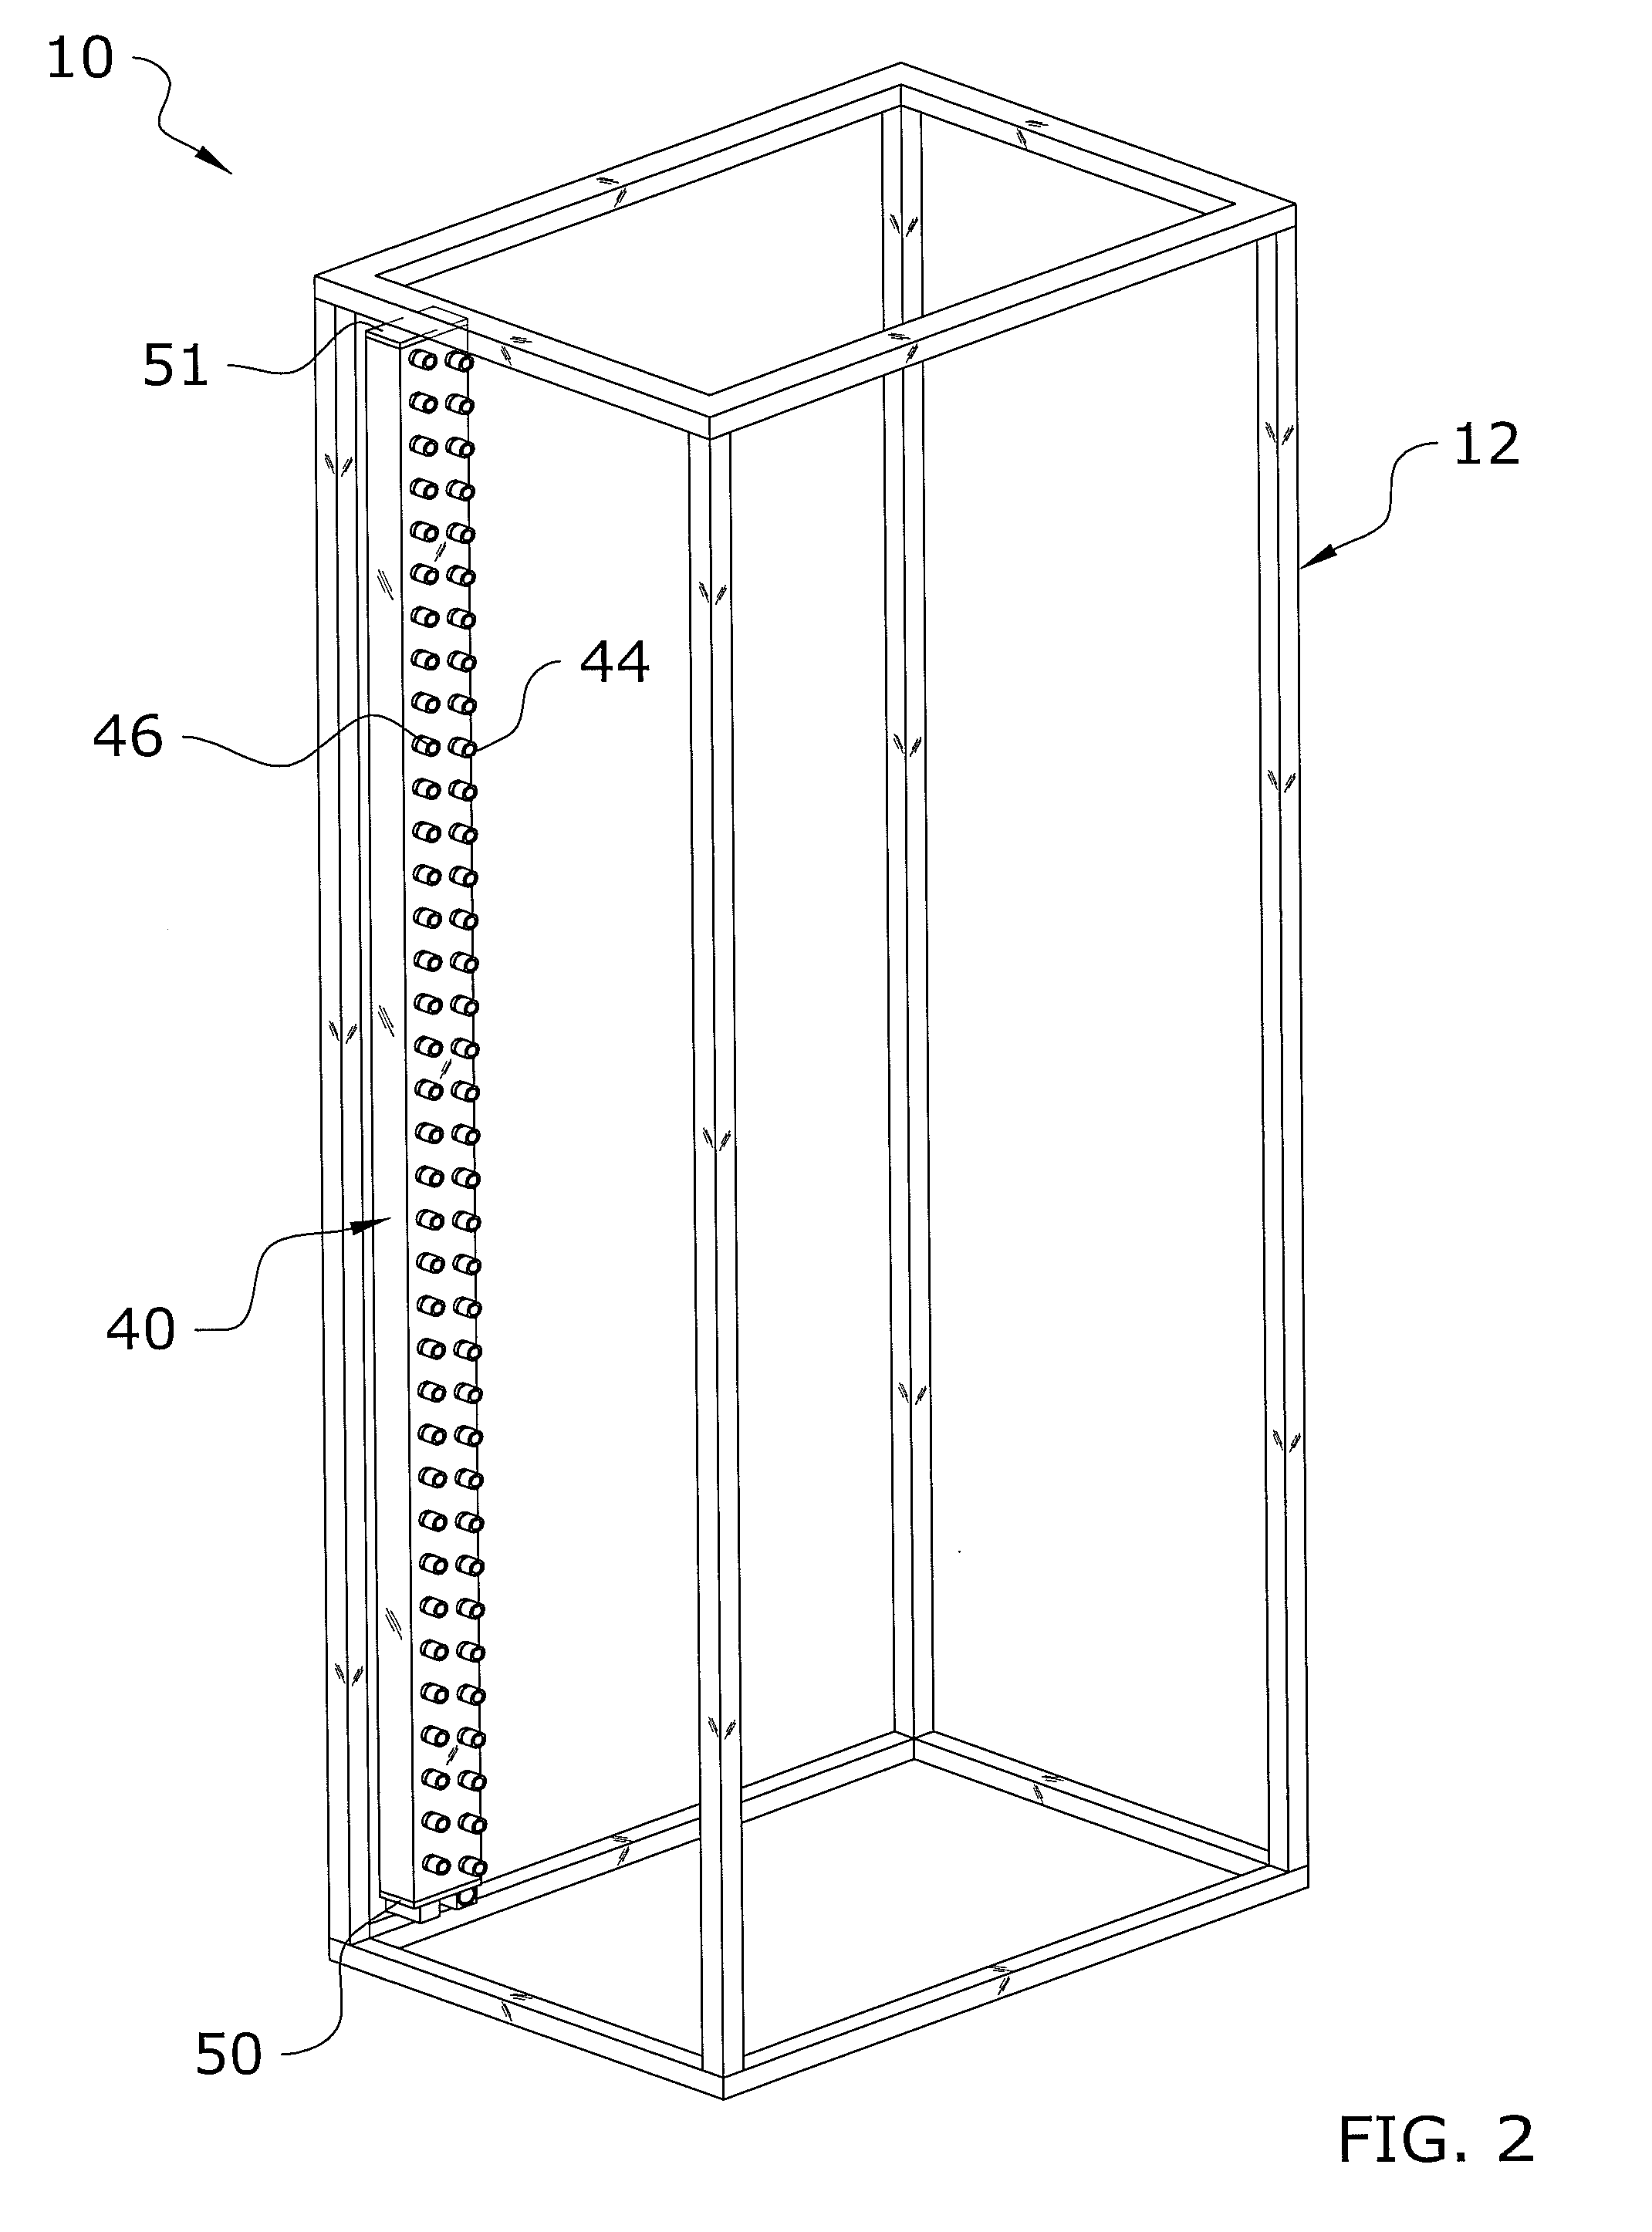 Manifold for a Two-Phase Cooling System